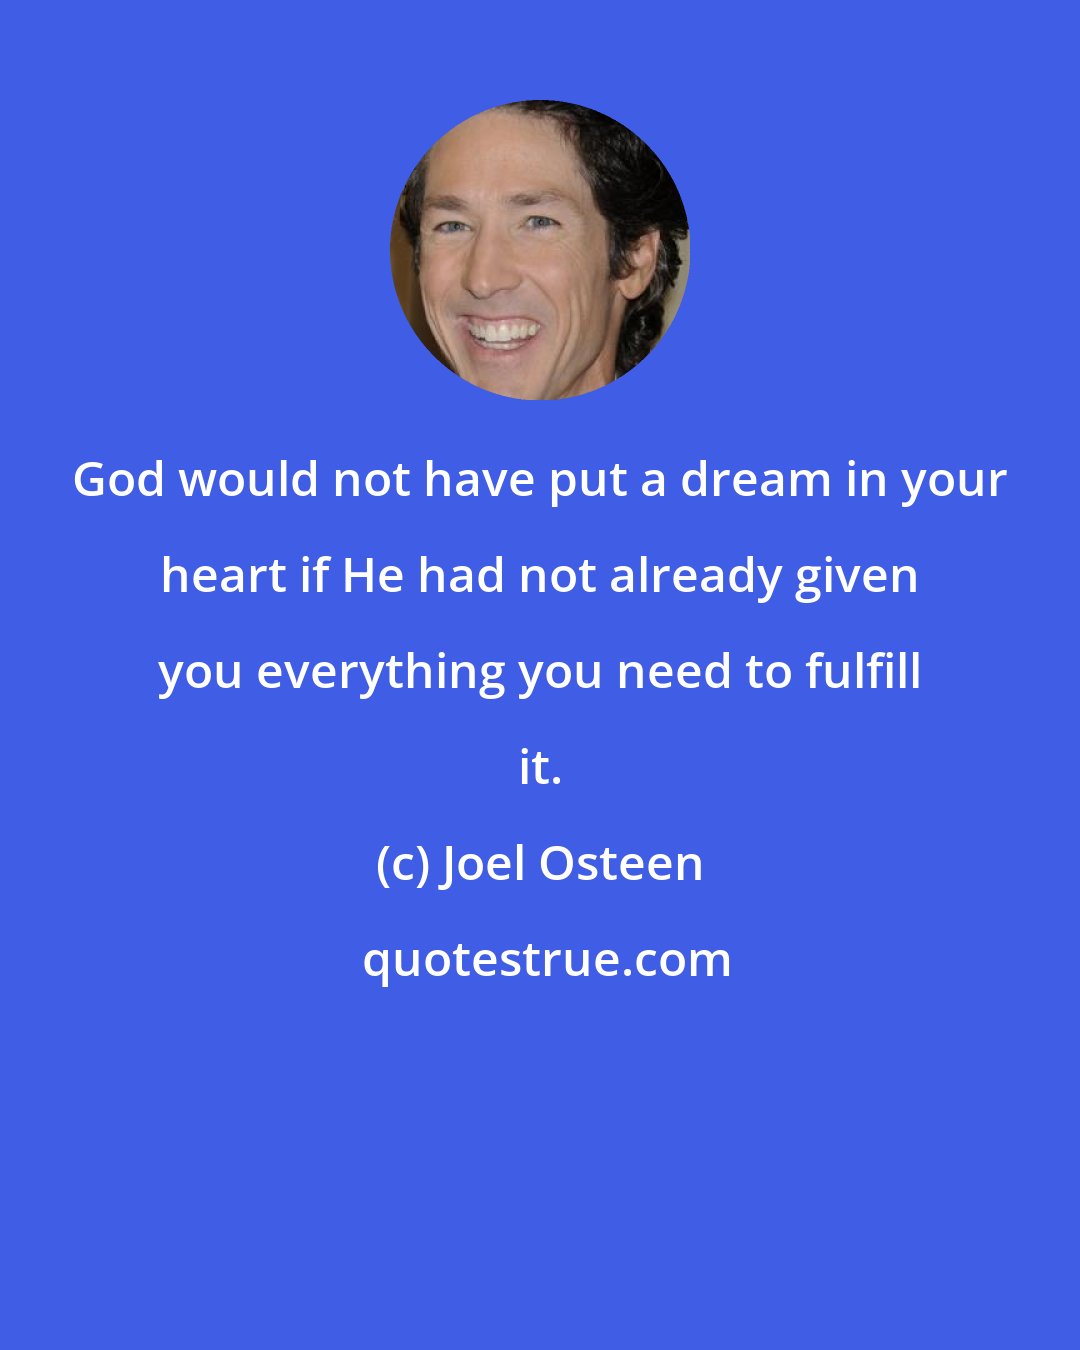 Joel Osteen: God would not have put a dream in your heart if He had not already given you everything you need to fulfill it.